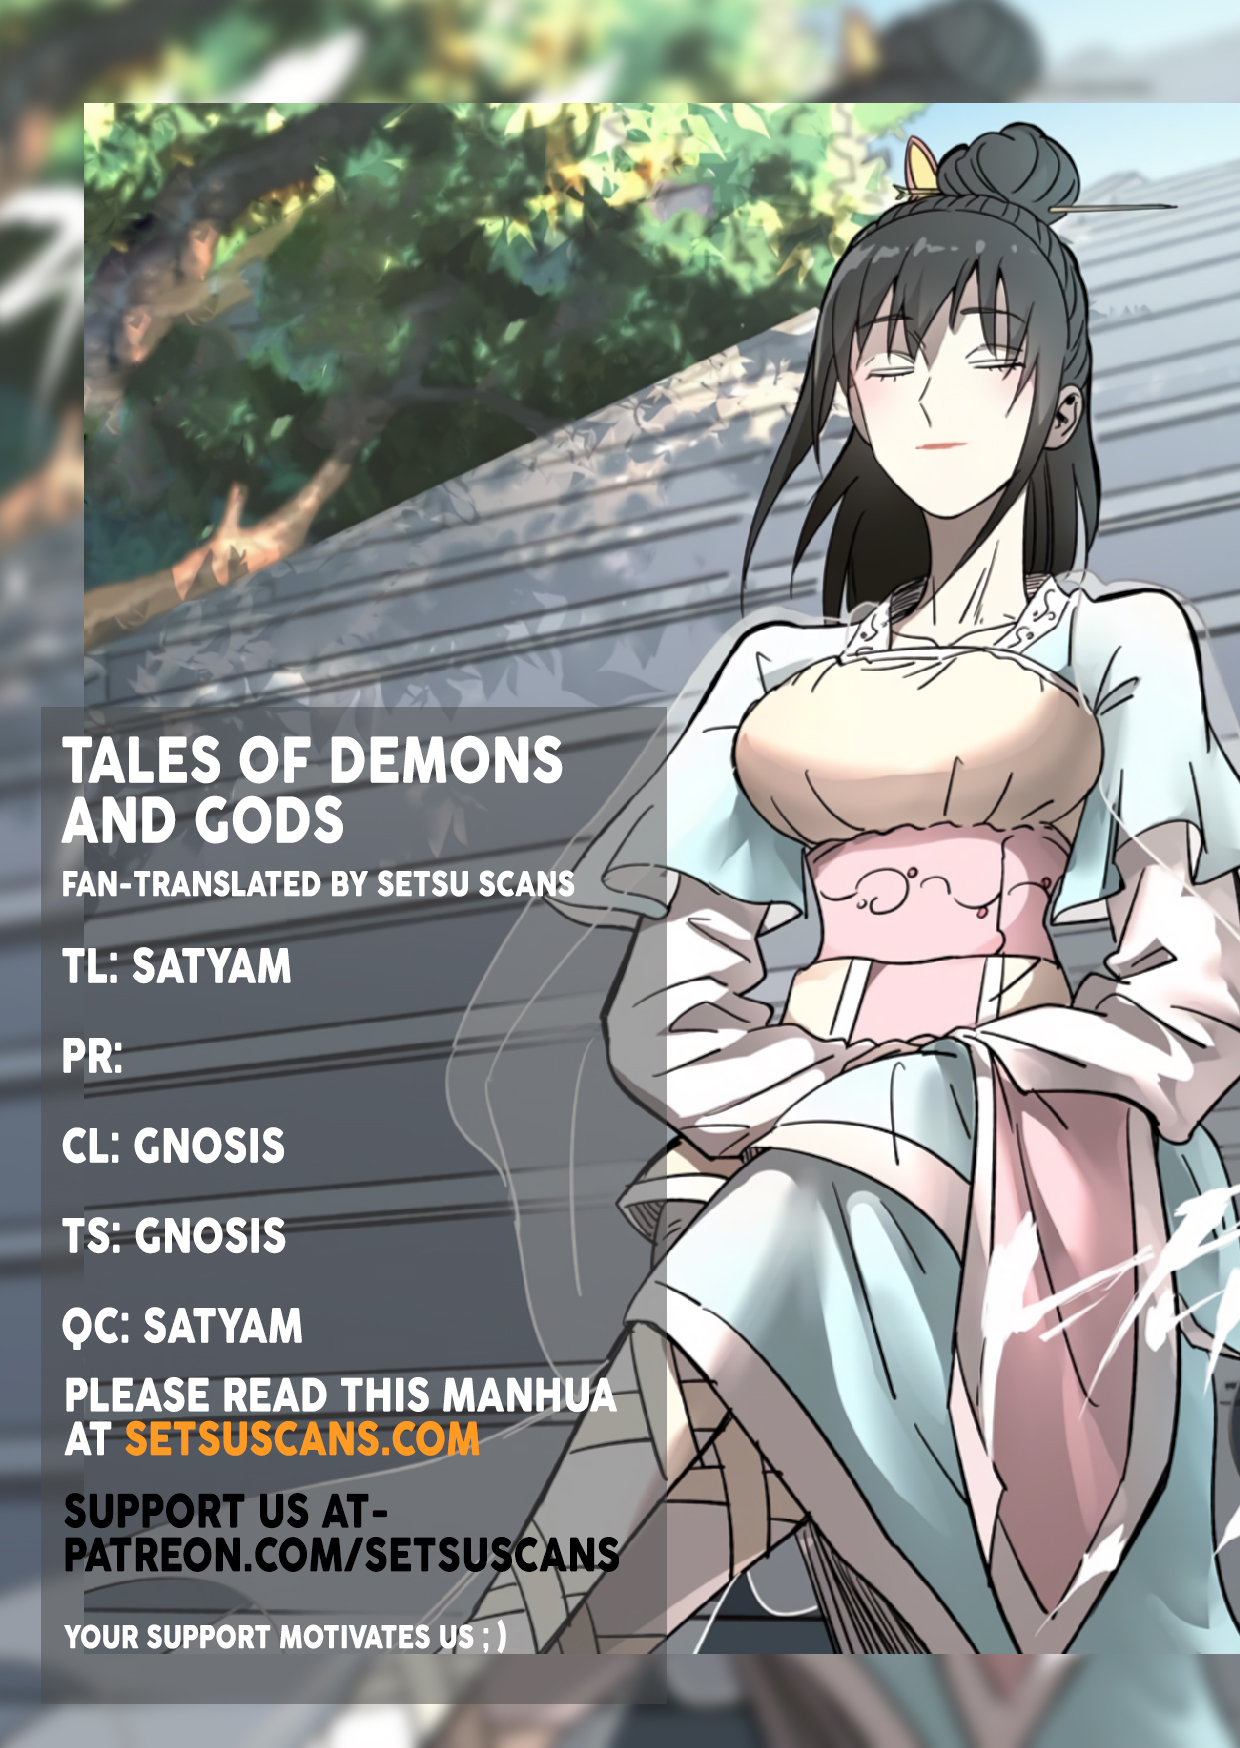 Tales of Demons and Gods - Chapter 23593 - Tian Yuan's Inheritance (2) - Image 1